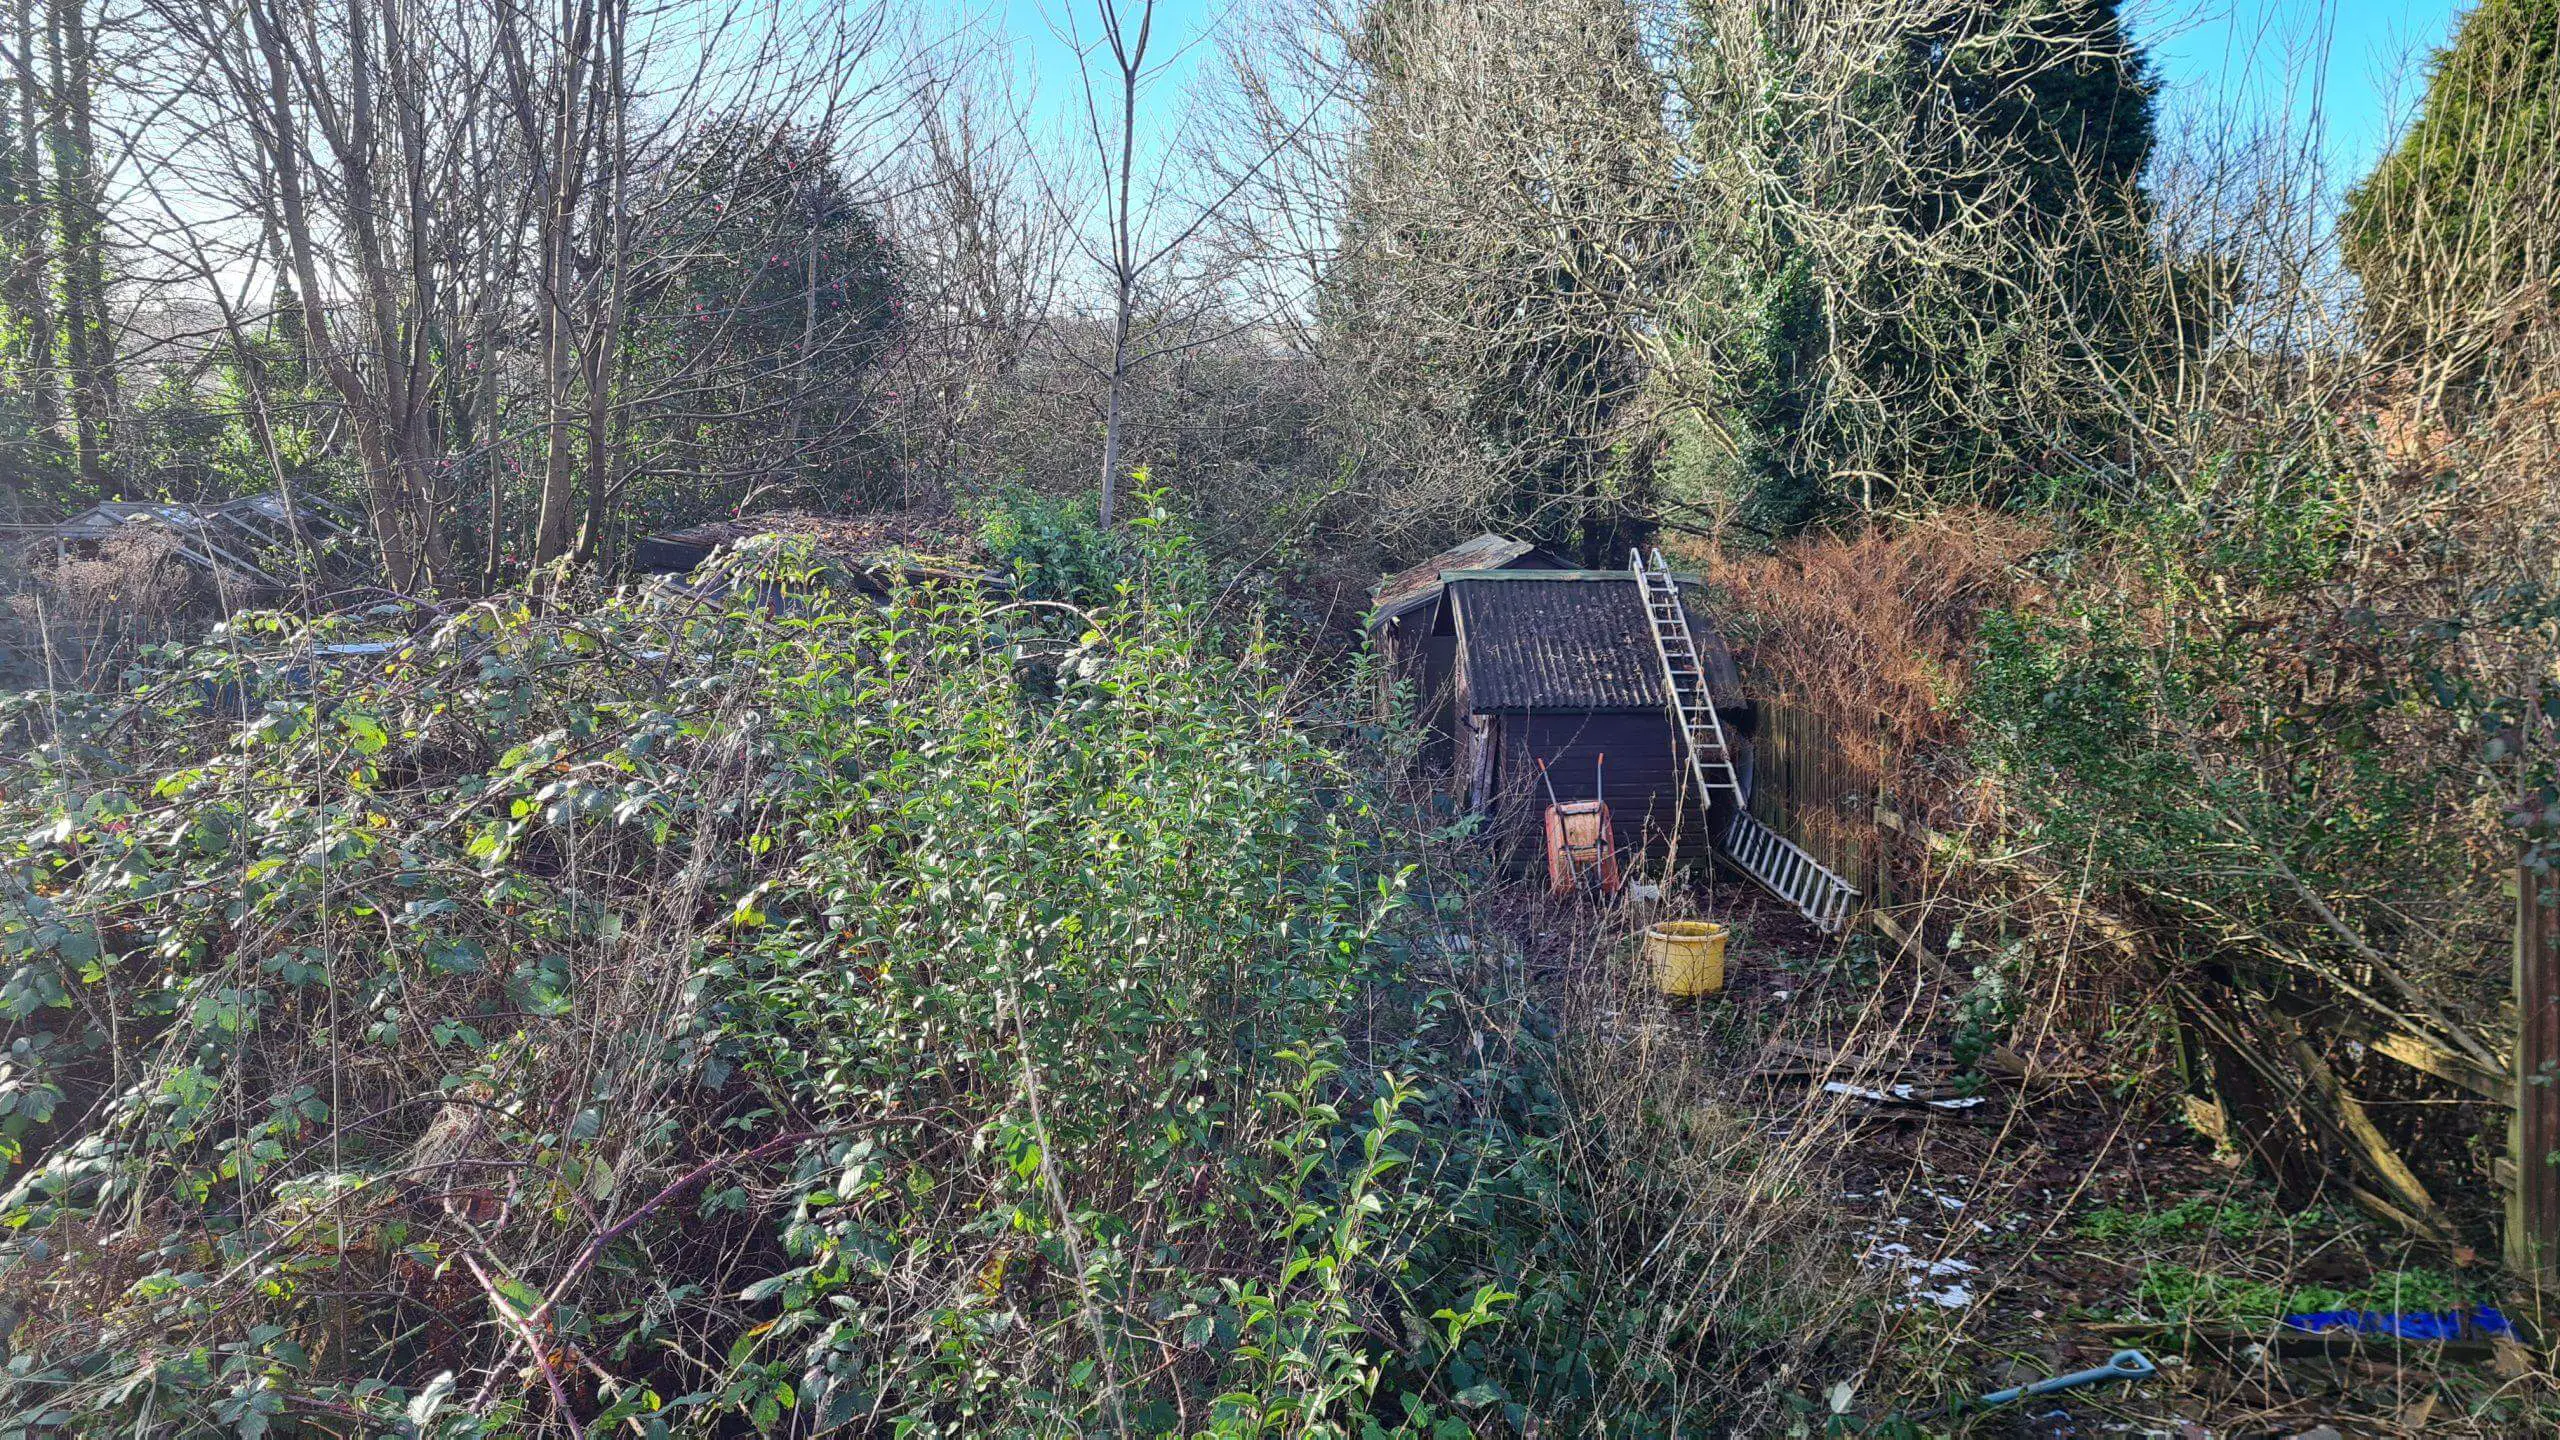 Even in January the invasive weeds have consumed the garden prior to a site clearance